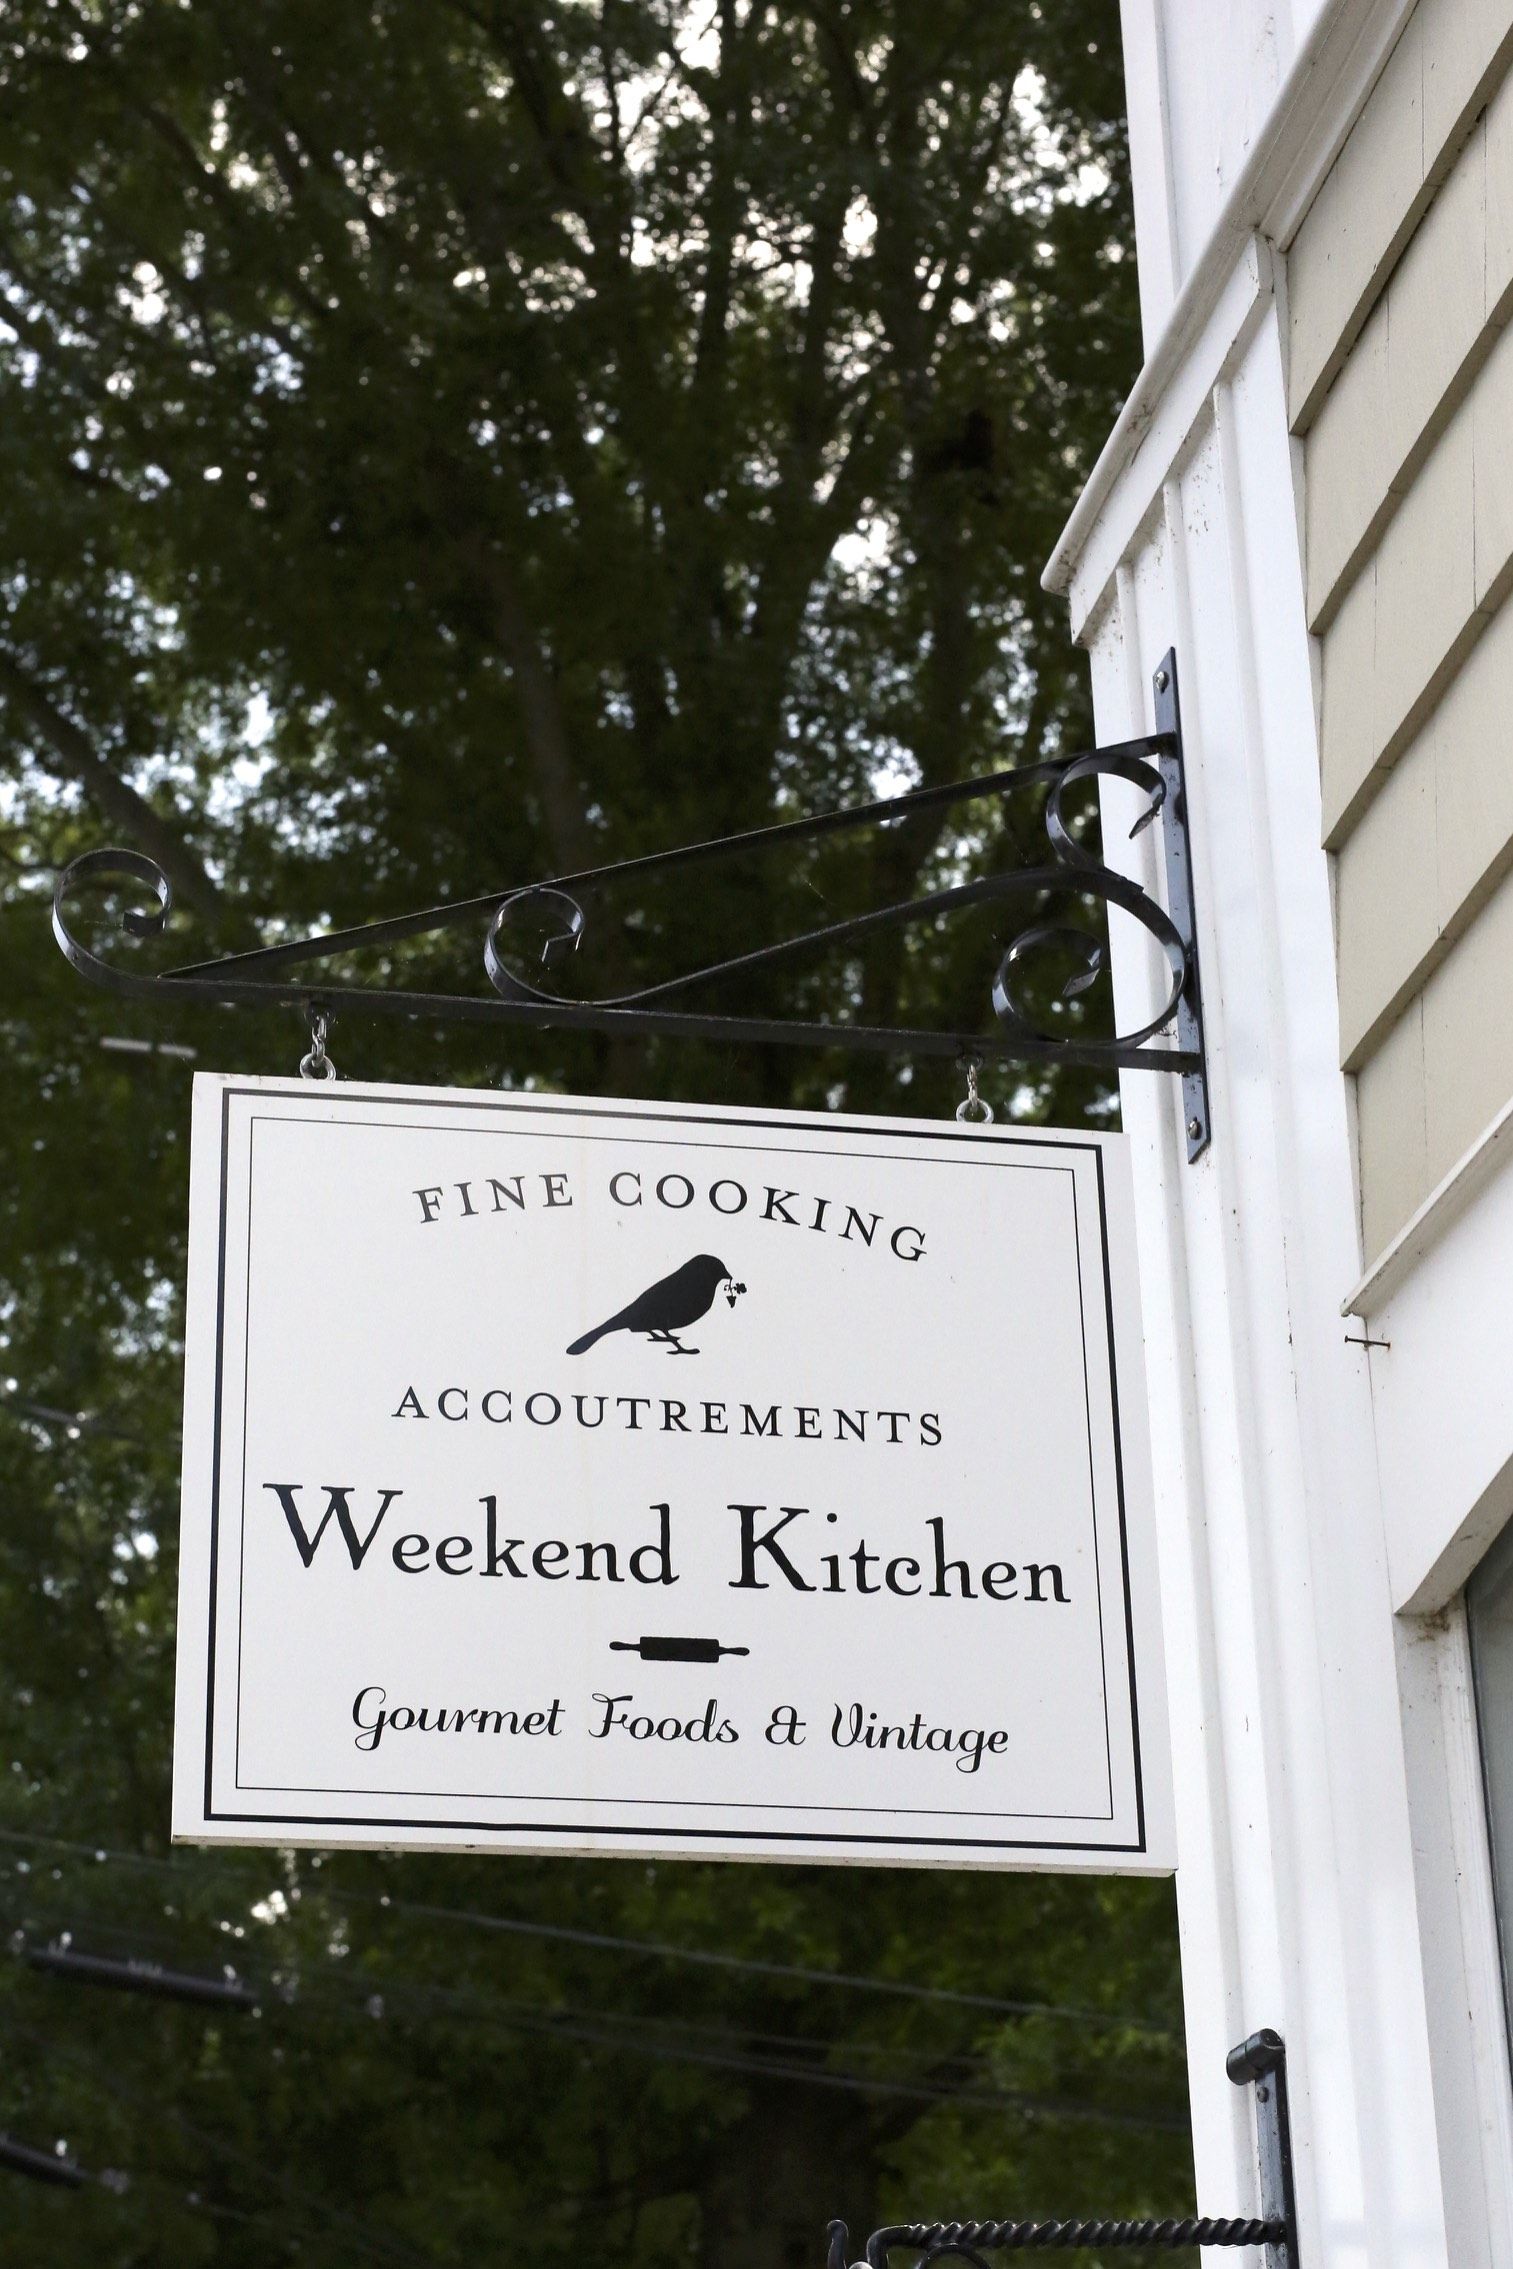 store sign for Weekend Kitchen in Essex CT